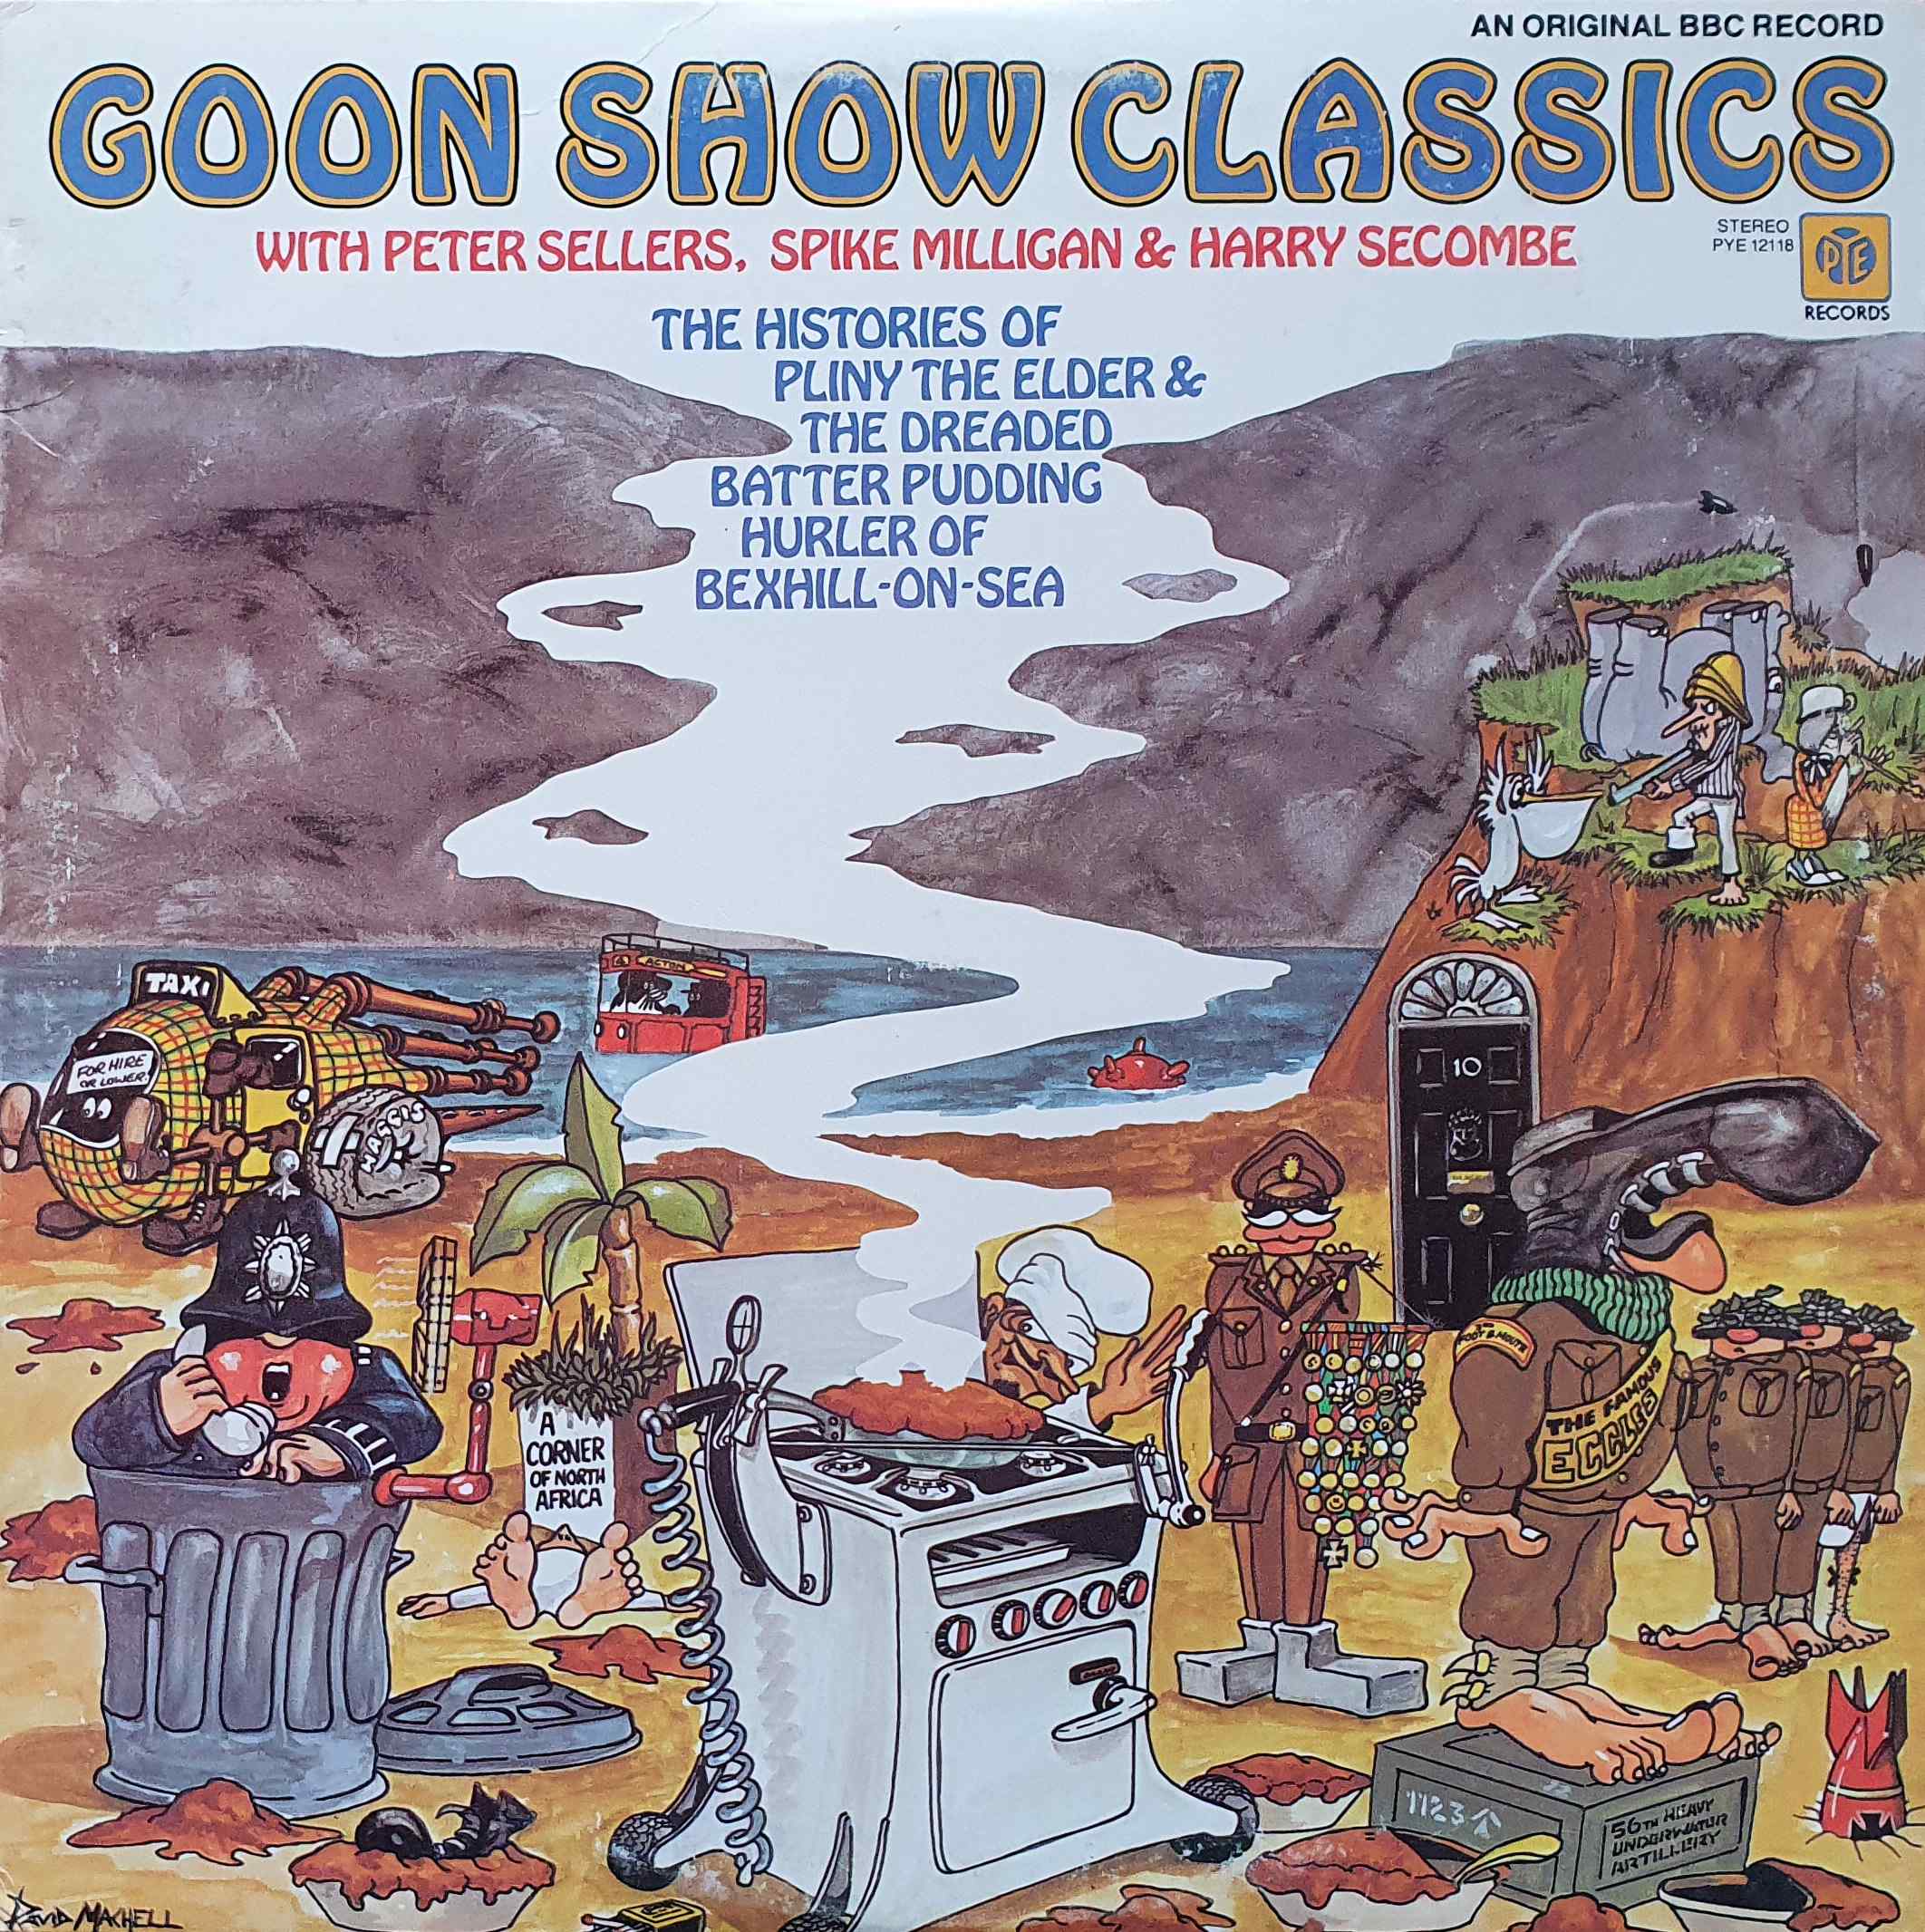 Picture of PYE 12118 Goon Show classics (US import) by artist Various from the BBC albums - Records and Tapes library